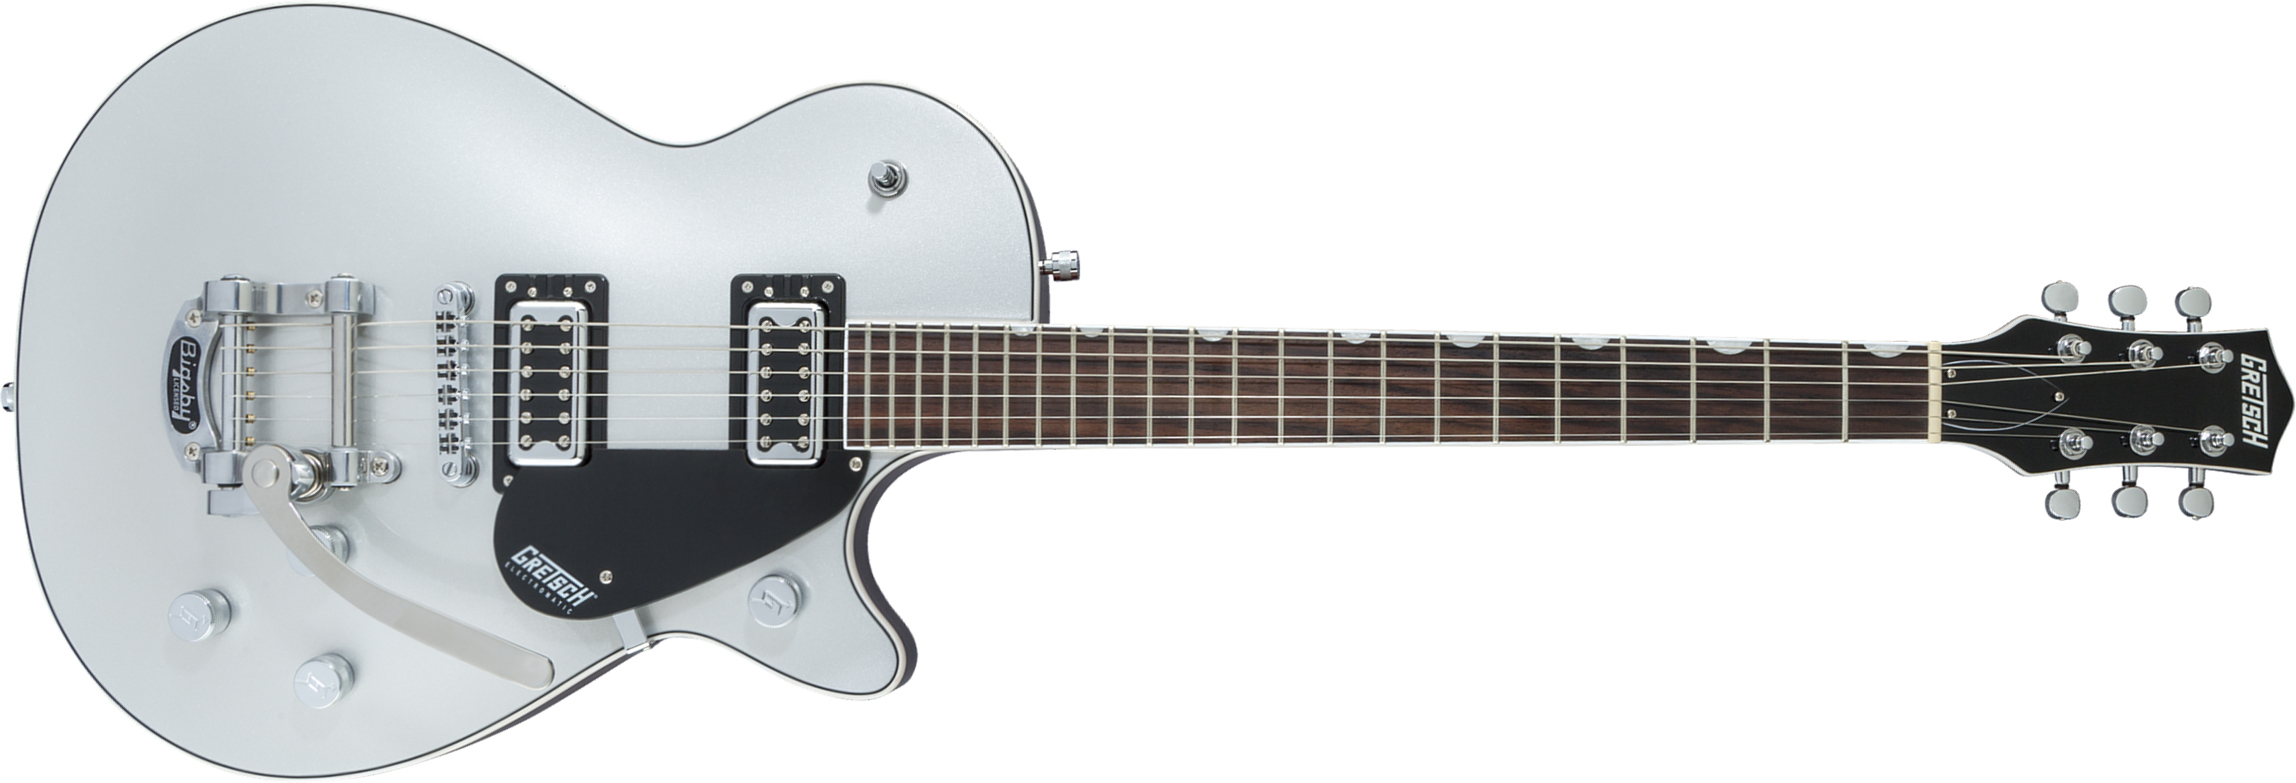 Gretsch G5230t Electromatic Jet Ft Single-cut Bigsby Hh Trem Wal - Airline Silver - Single cut electric guitar - Main picture